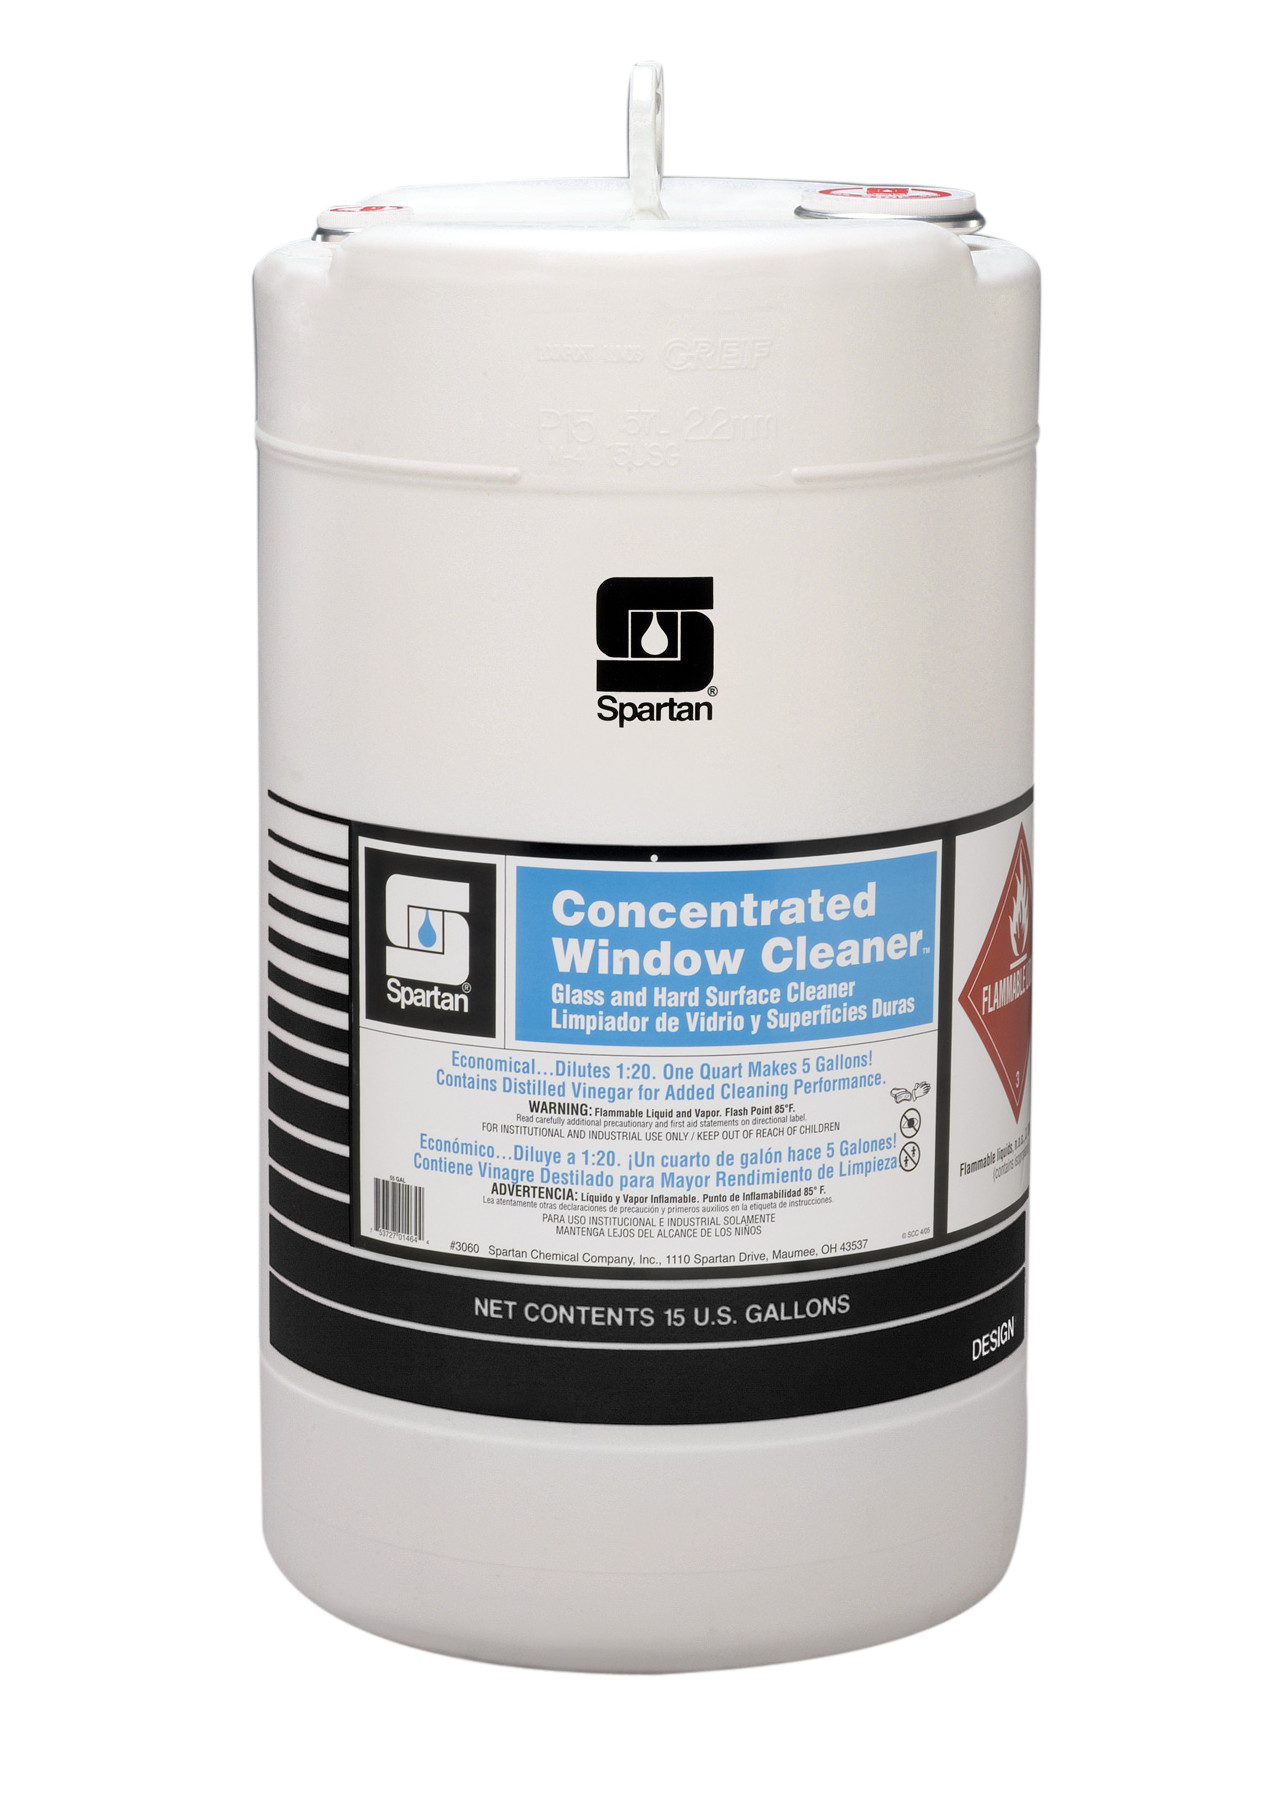 Spartan Chemical Company Concentrated Window Cleaner, 15 GAL DRUM